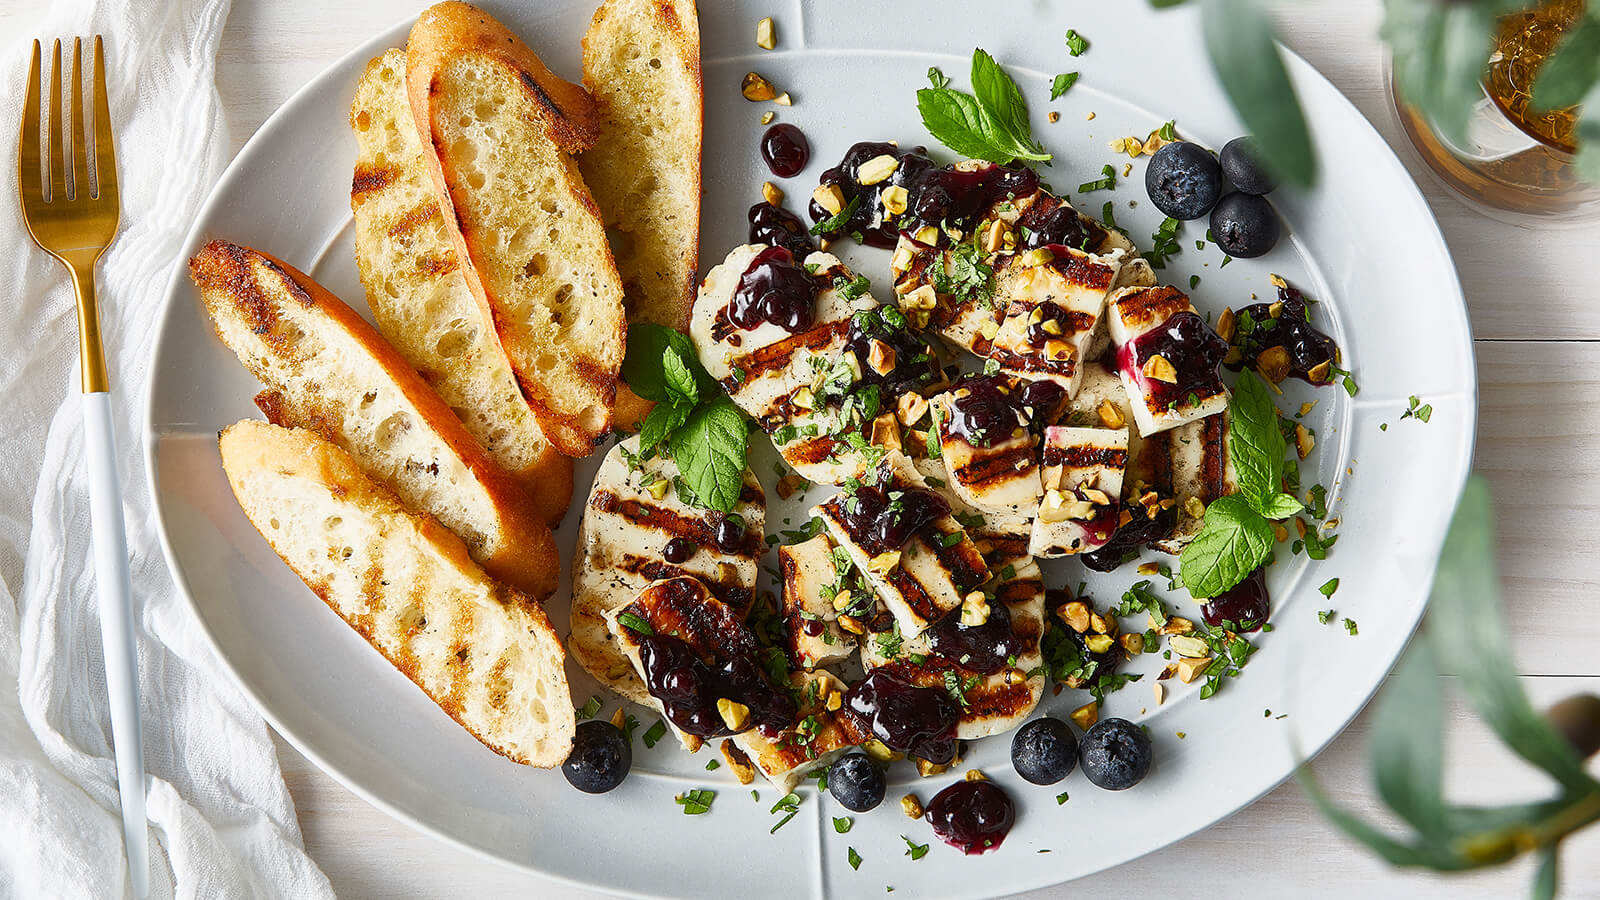 Grilled Halloumi with Blueberry, Mint and Pistachios